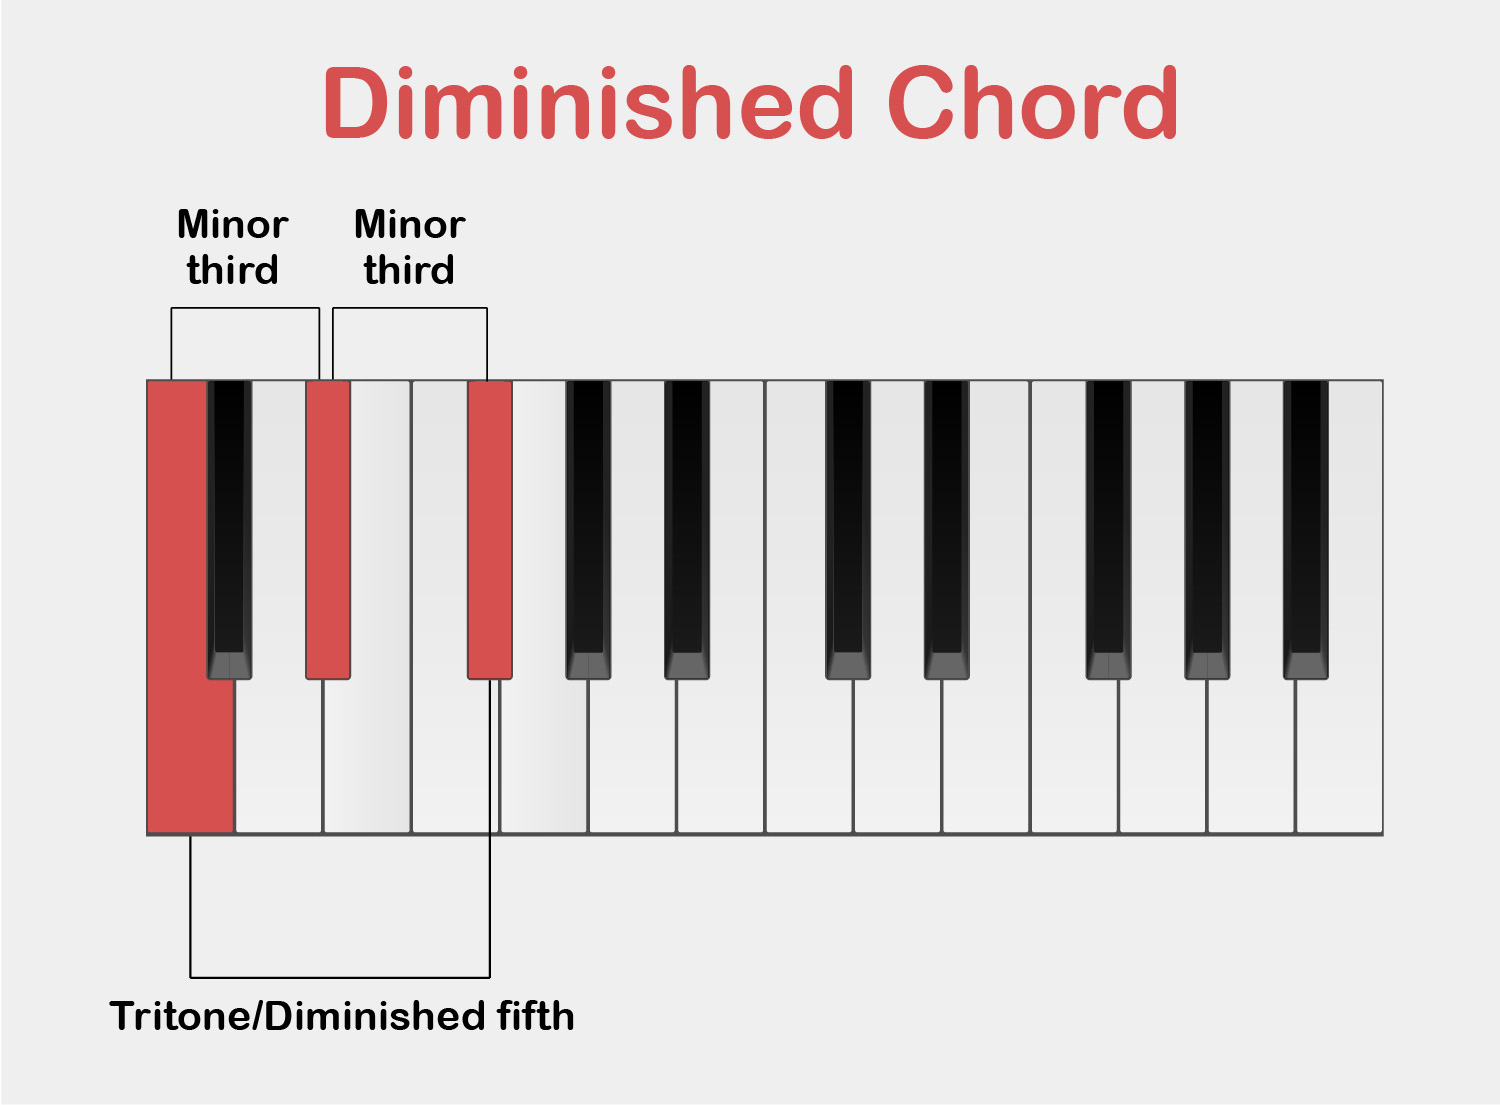 These are the intervals in a diminished chord